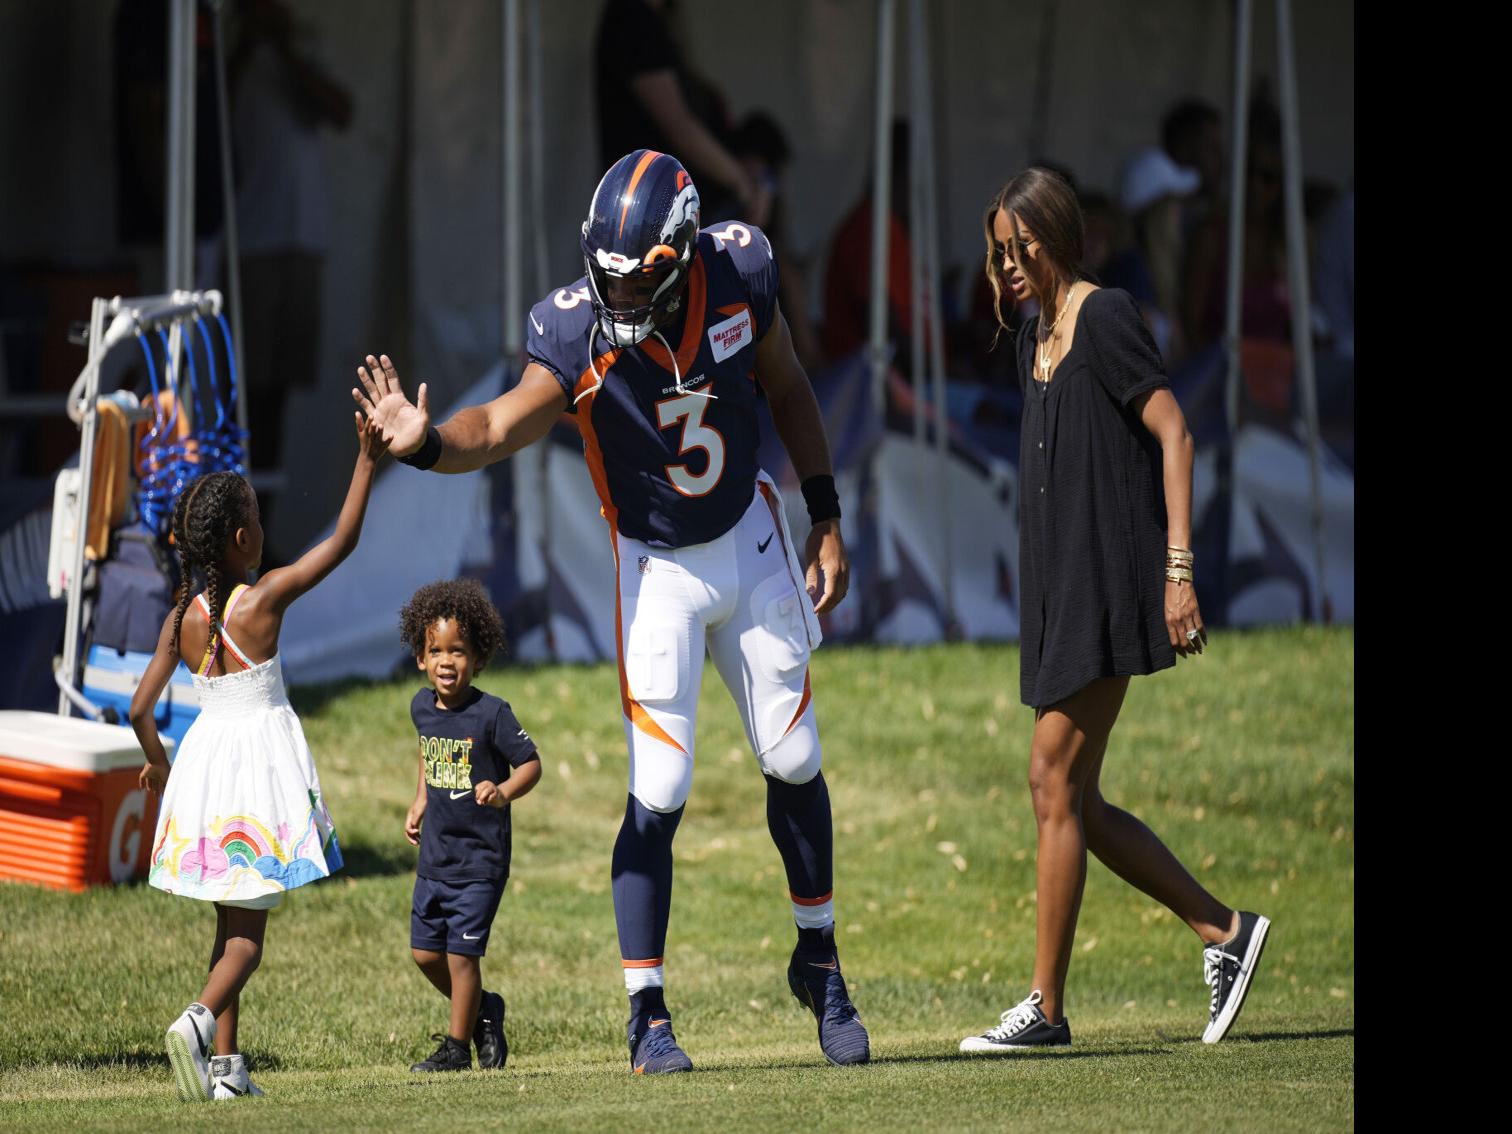 Ciara and Russell Wilson's Family at Denver Broncos Signing